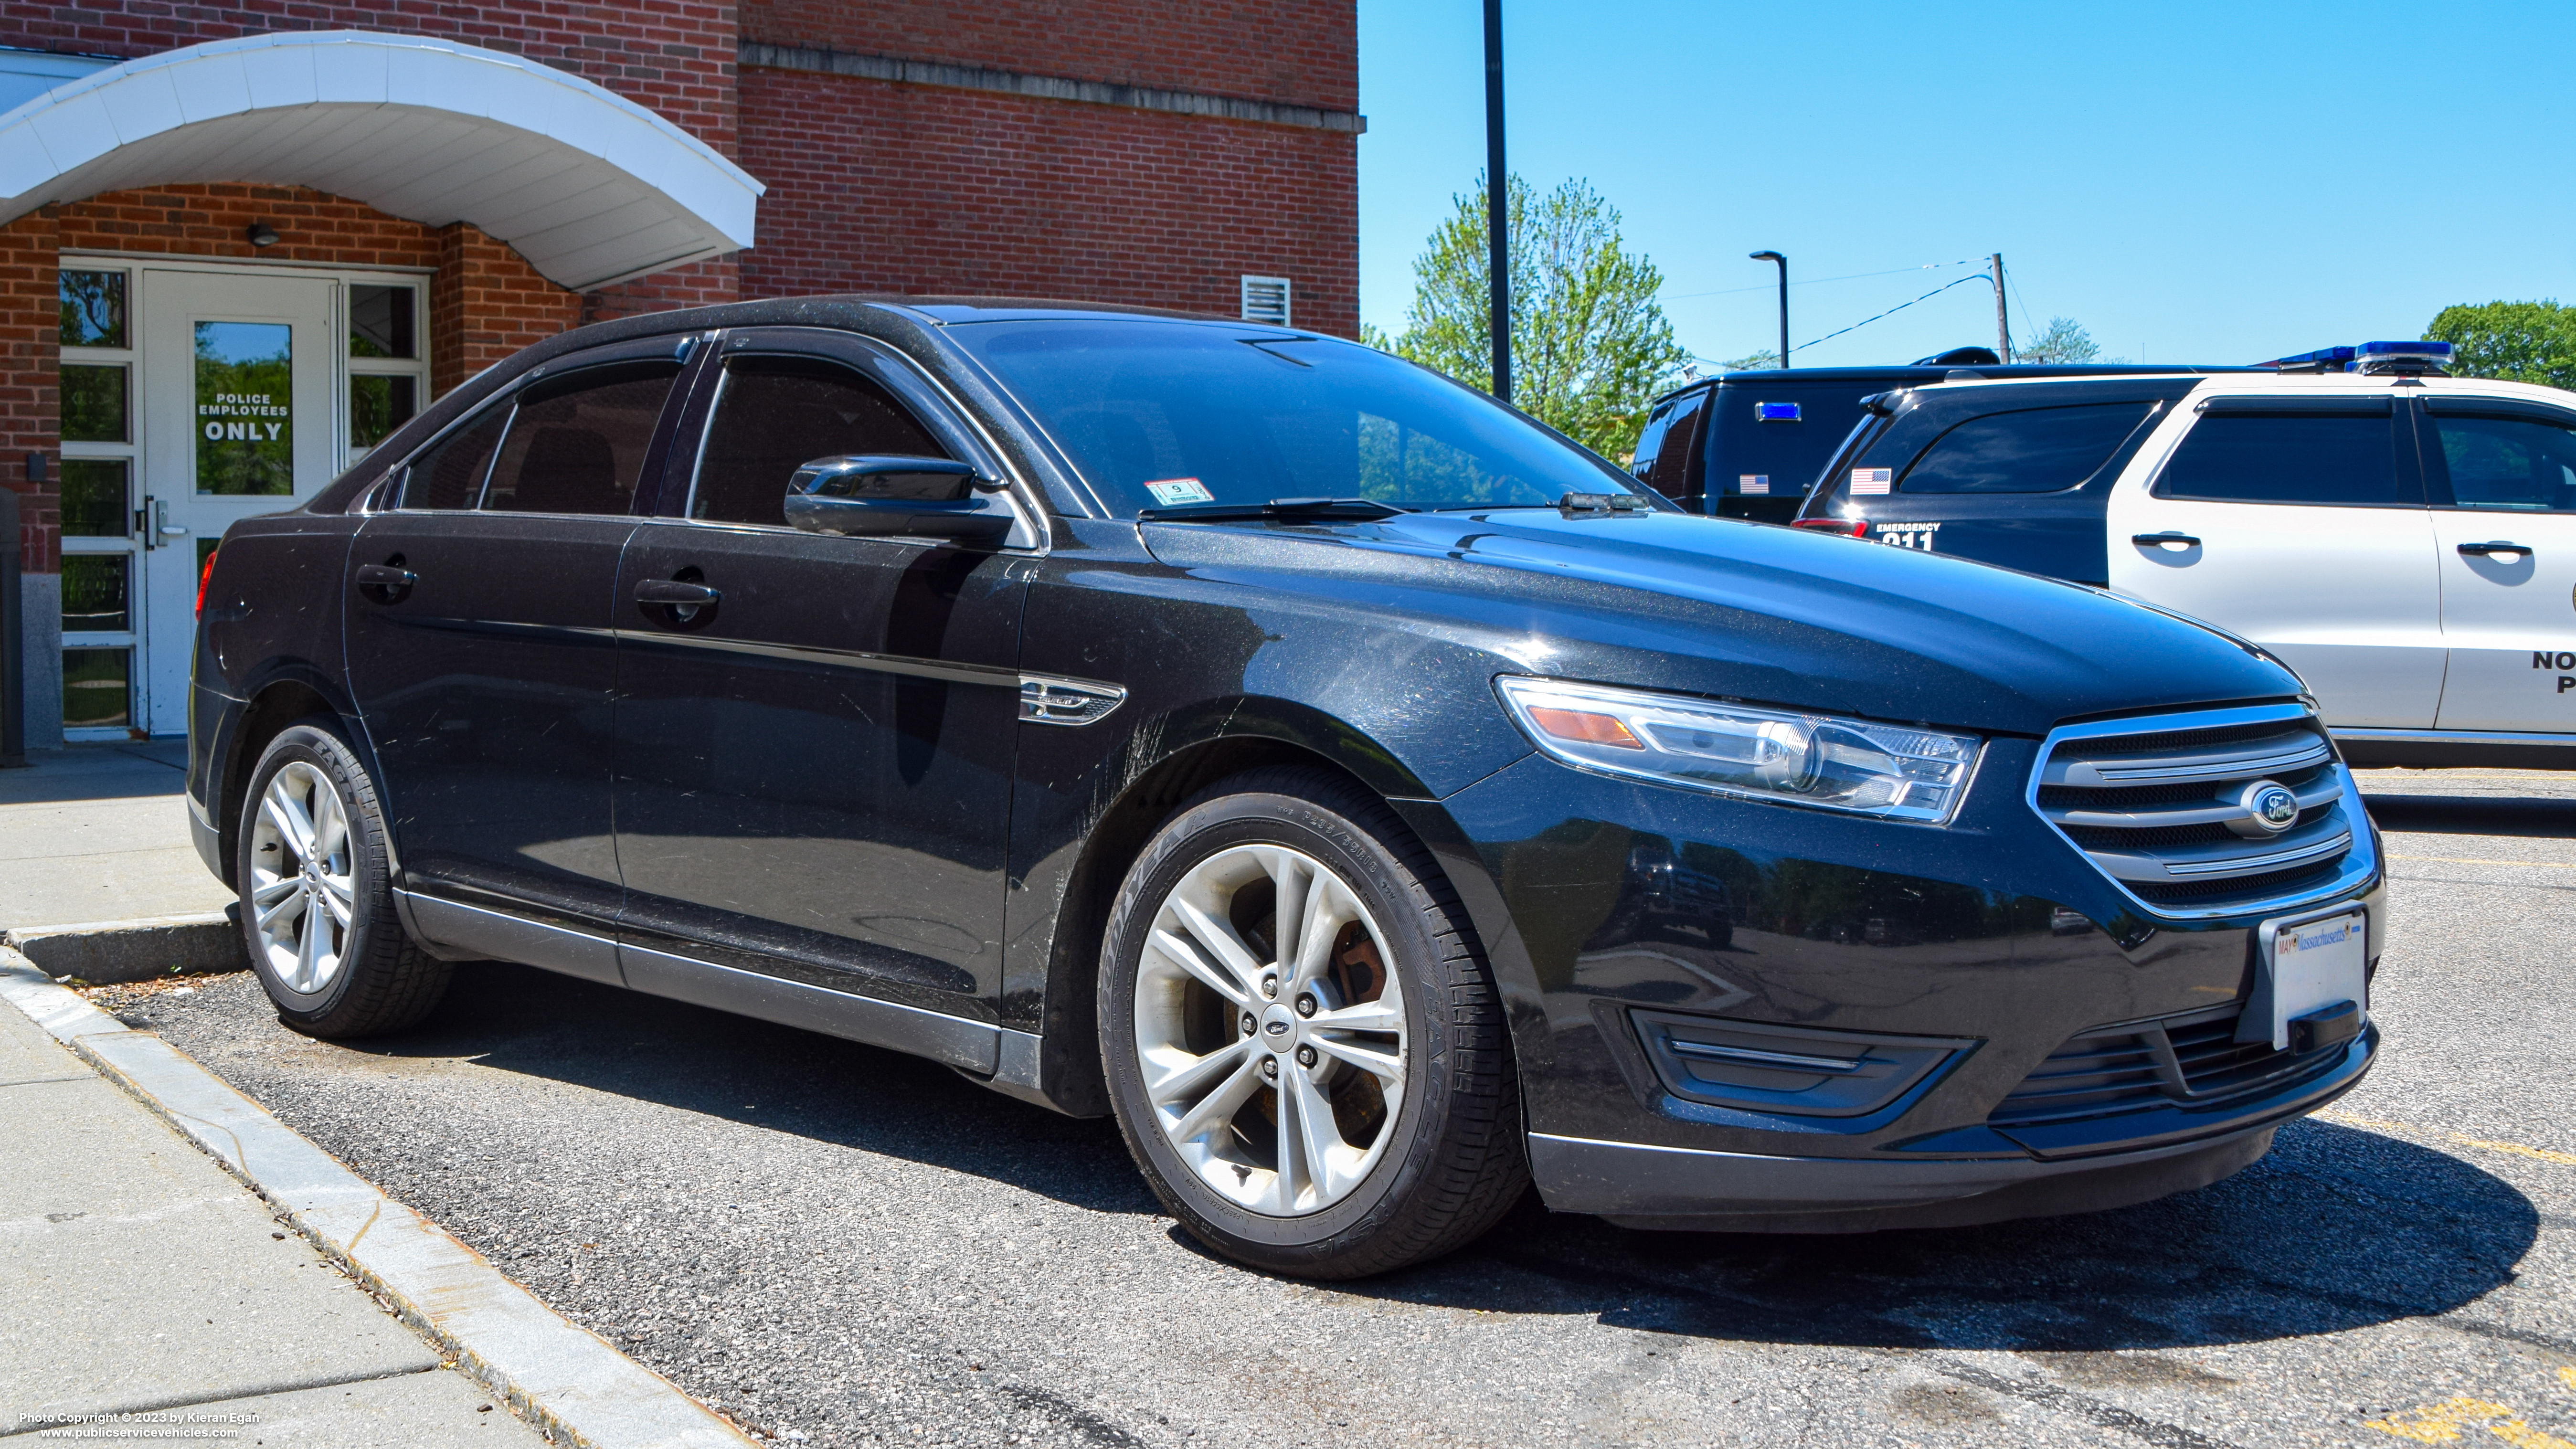 A photo  of Norwood Police
            Unmarked Unit, a 2013-2019 Ford Taurus             taken by Kieran Egan